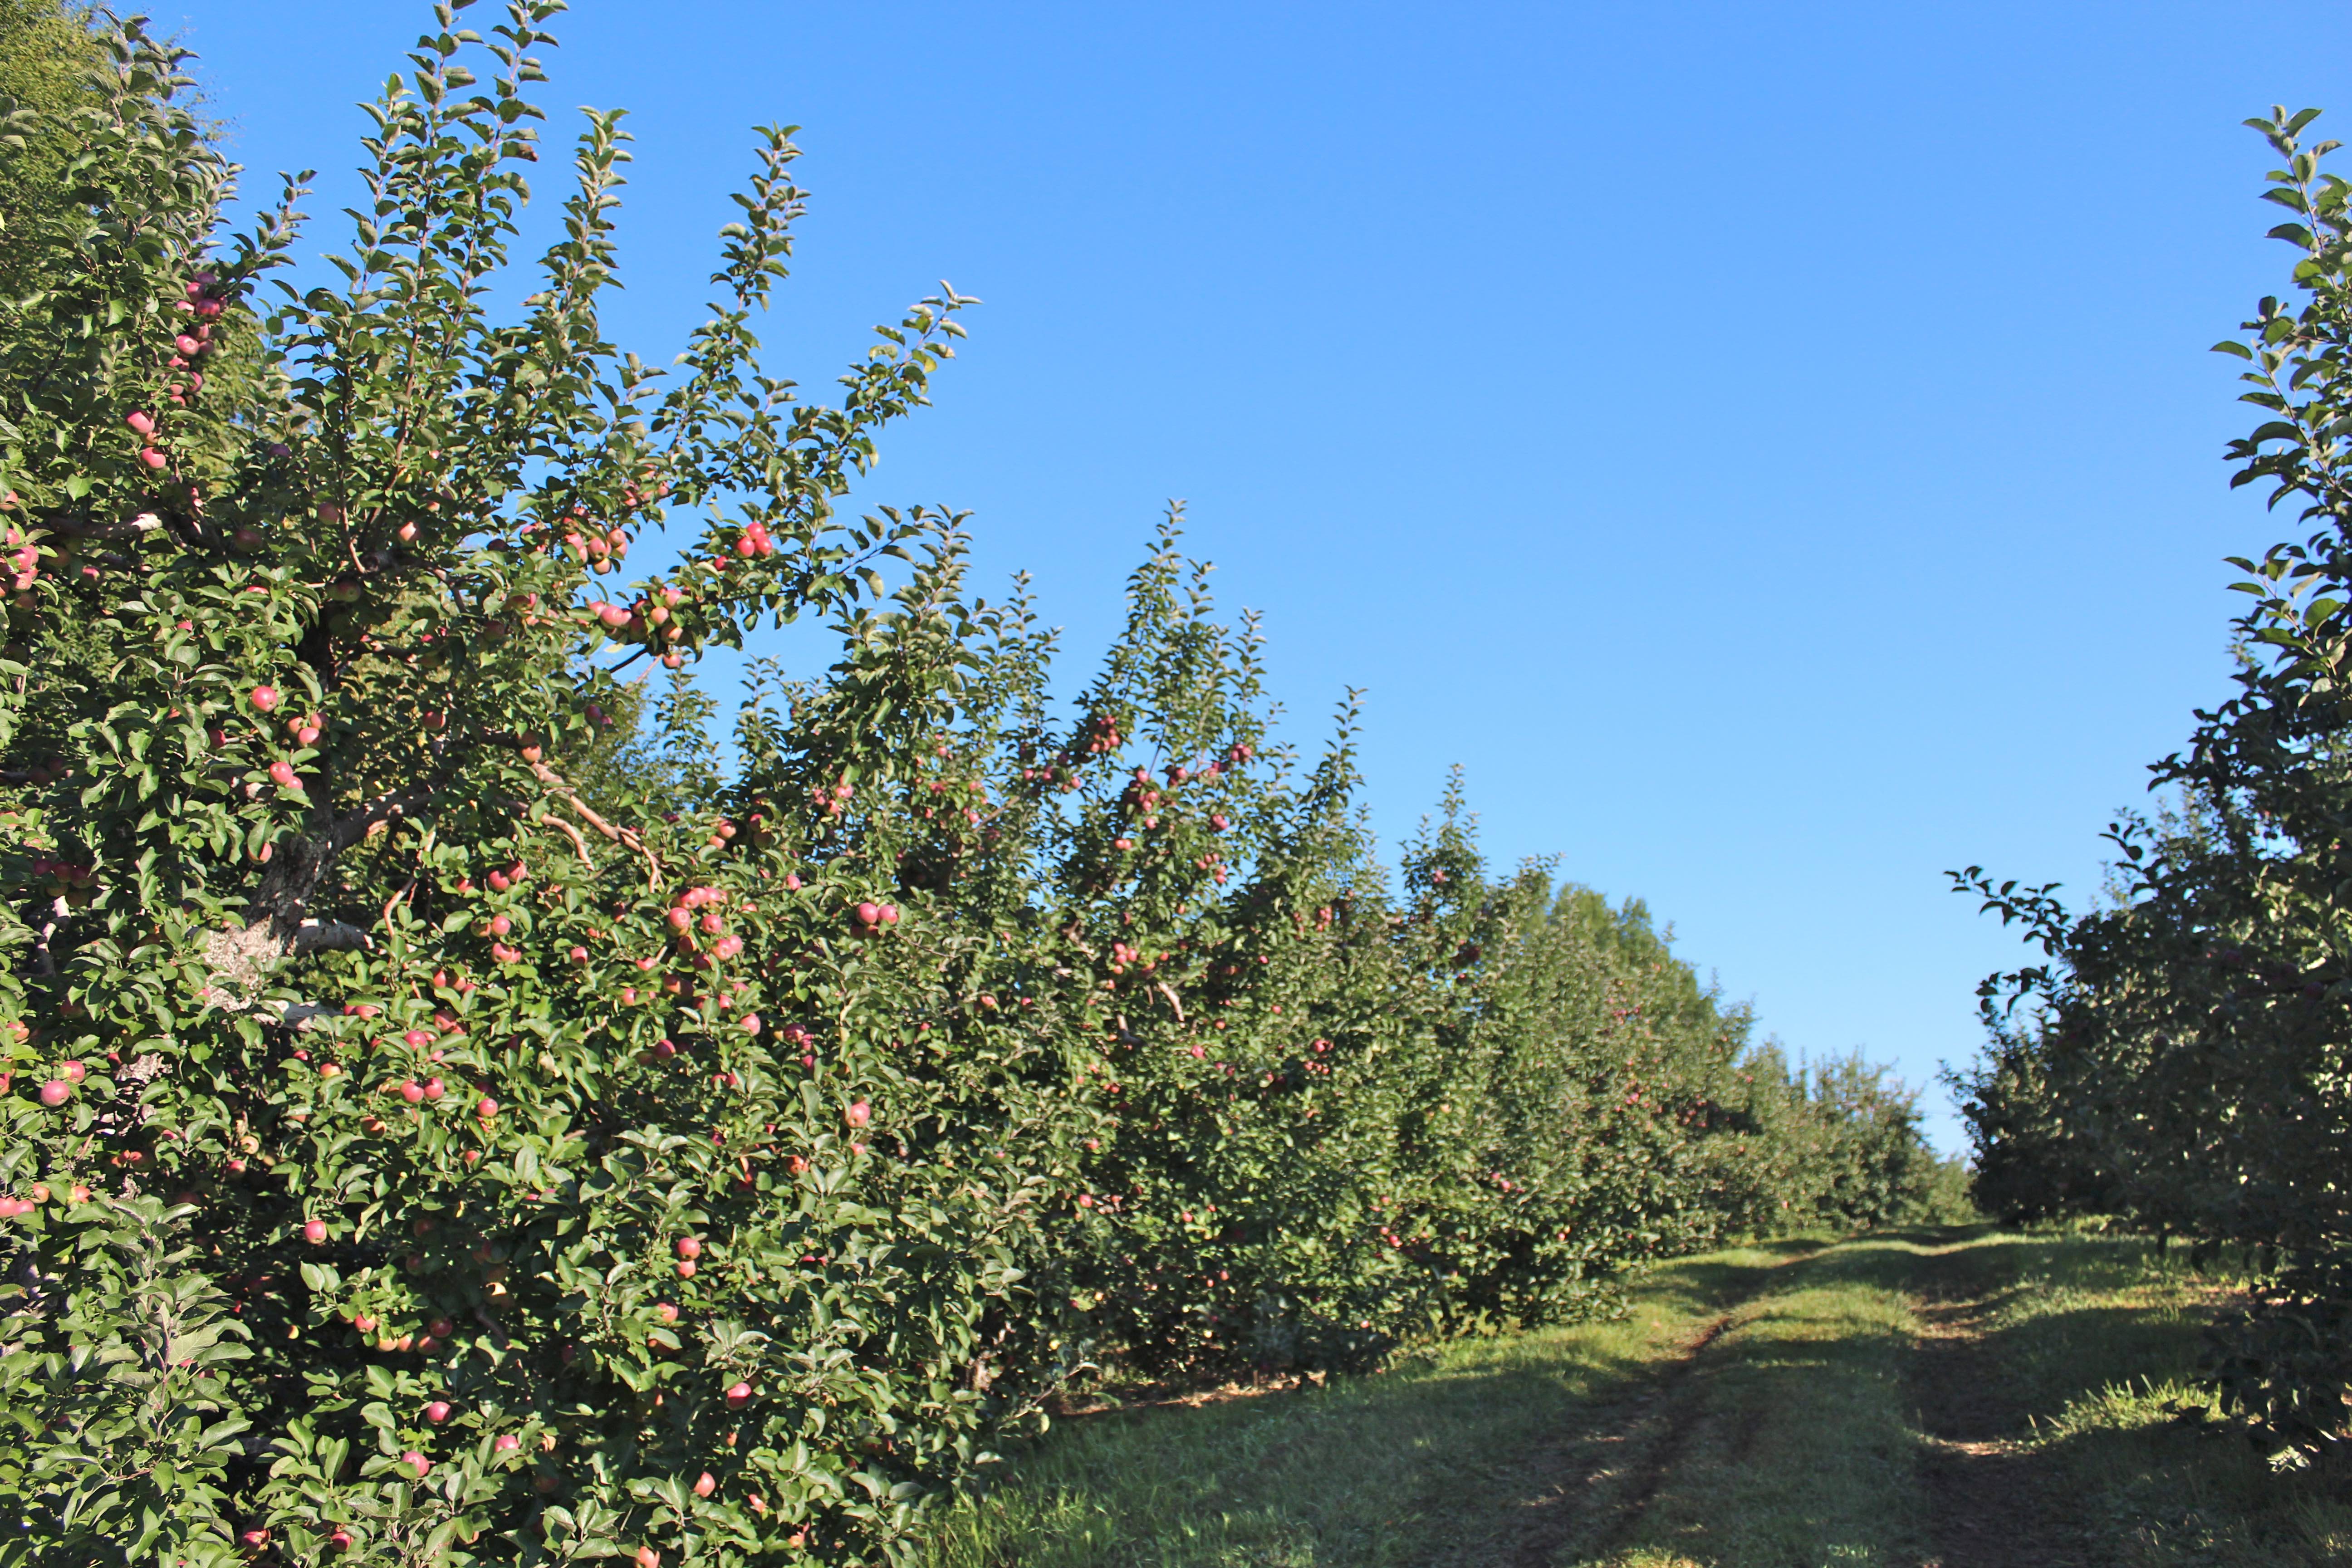 There is a good crop at Pine Hill Orchards in Colrain, Massachusetts ...